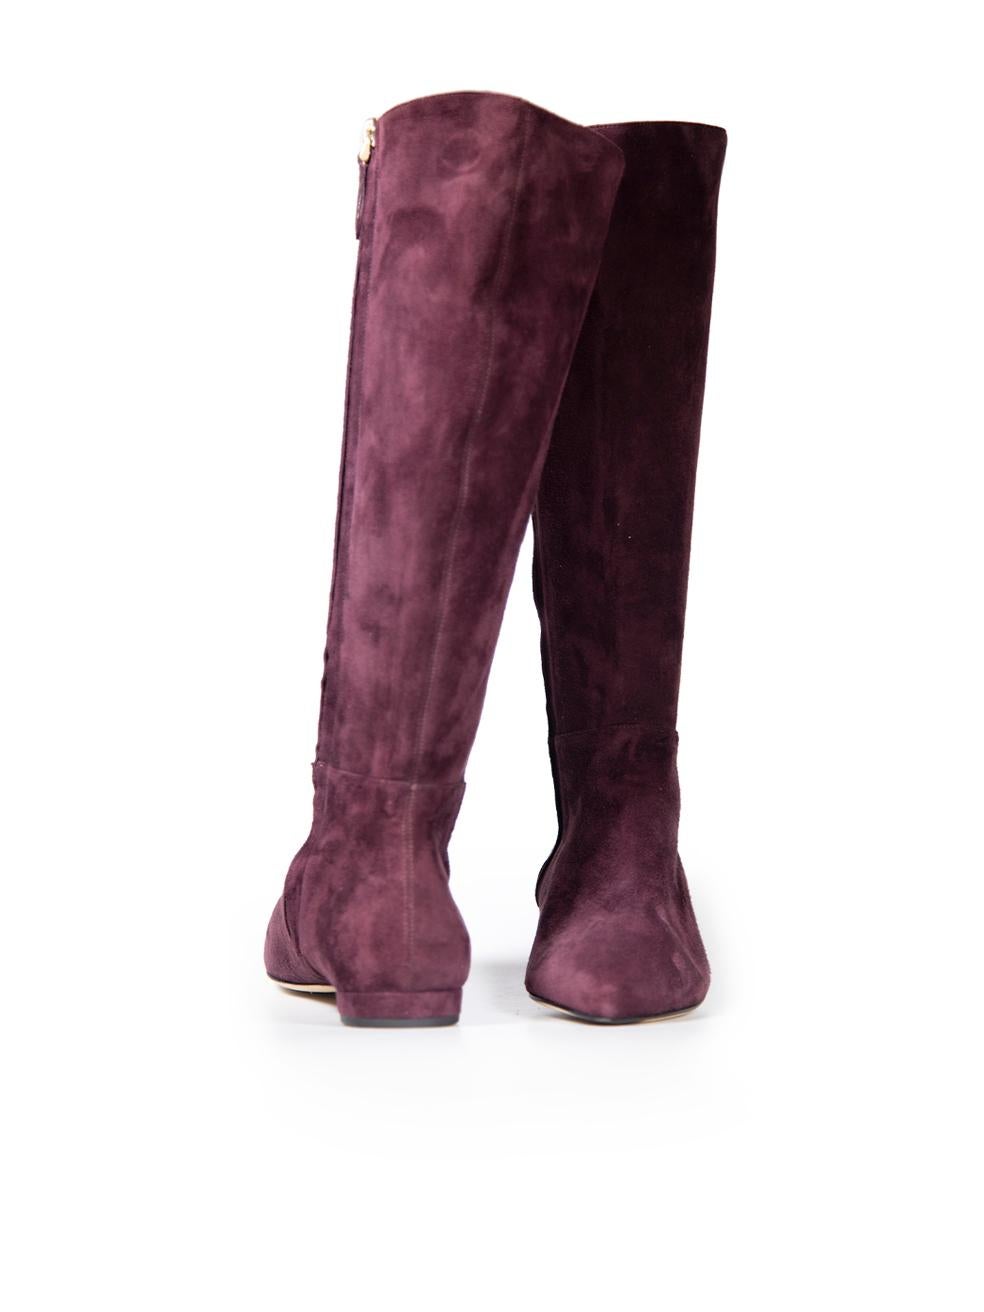 Bally Purple Suede Pointed-Toe Long Boots Size EU 38.5 In Good Condition For Sale In London, GB